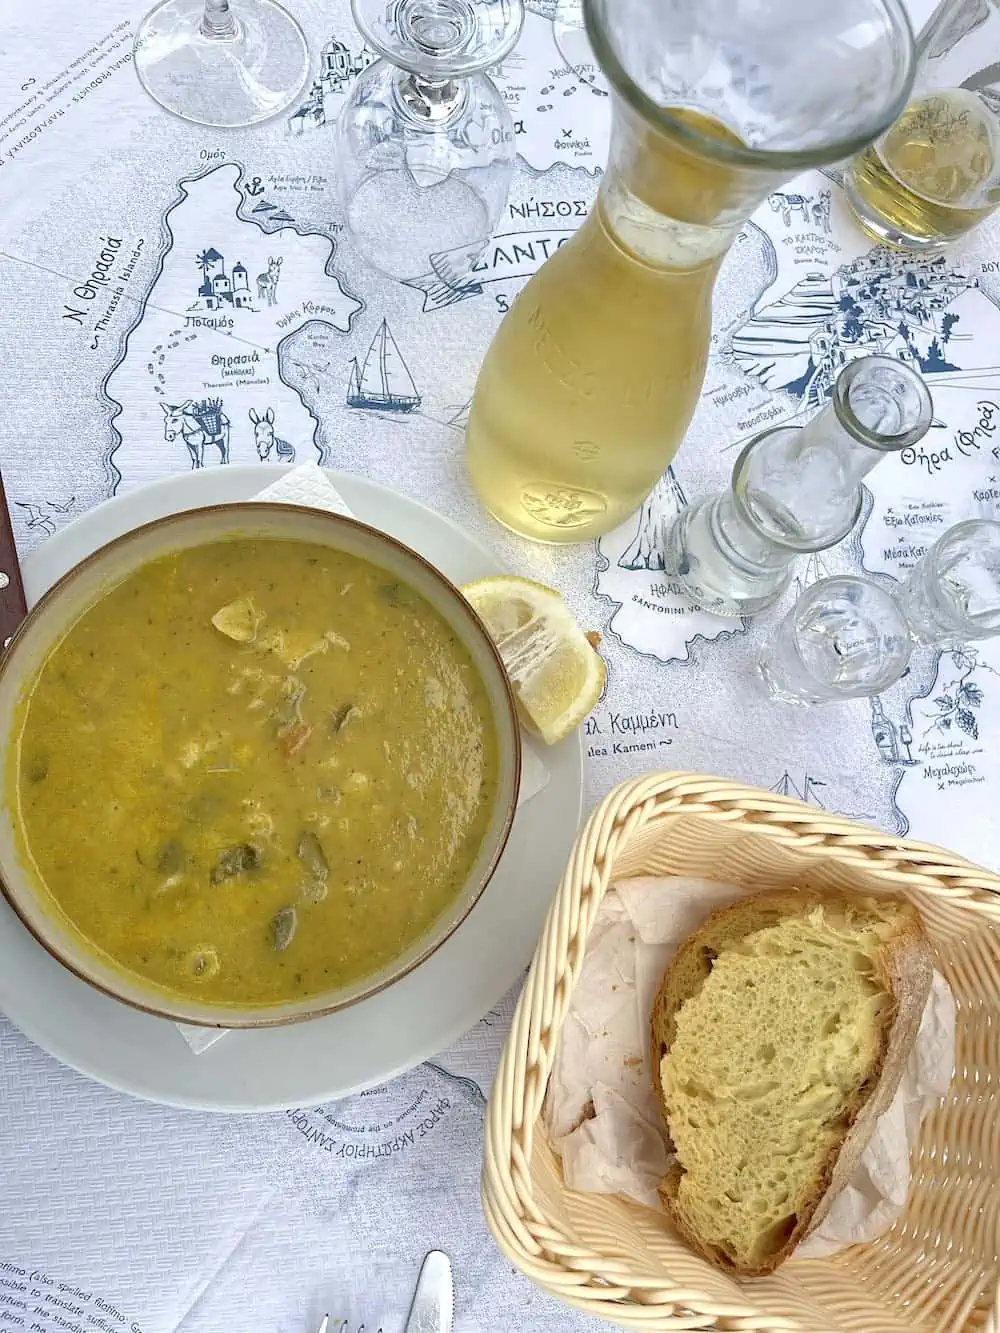 Greek wine and food such as soup and bread in Santorini. 